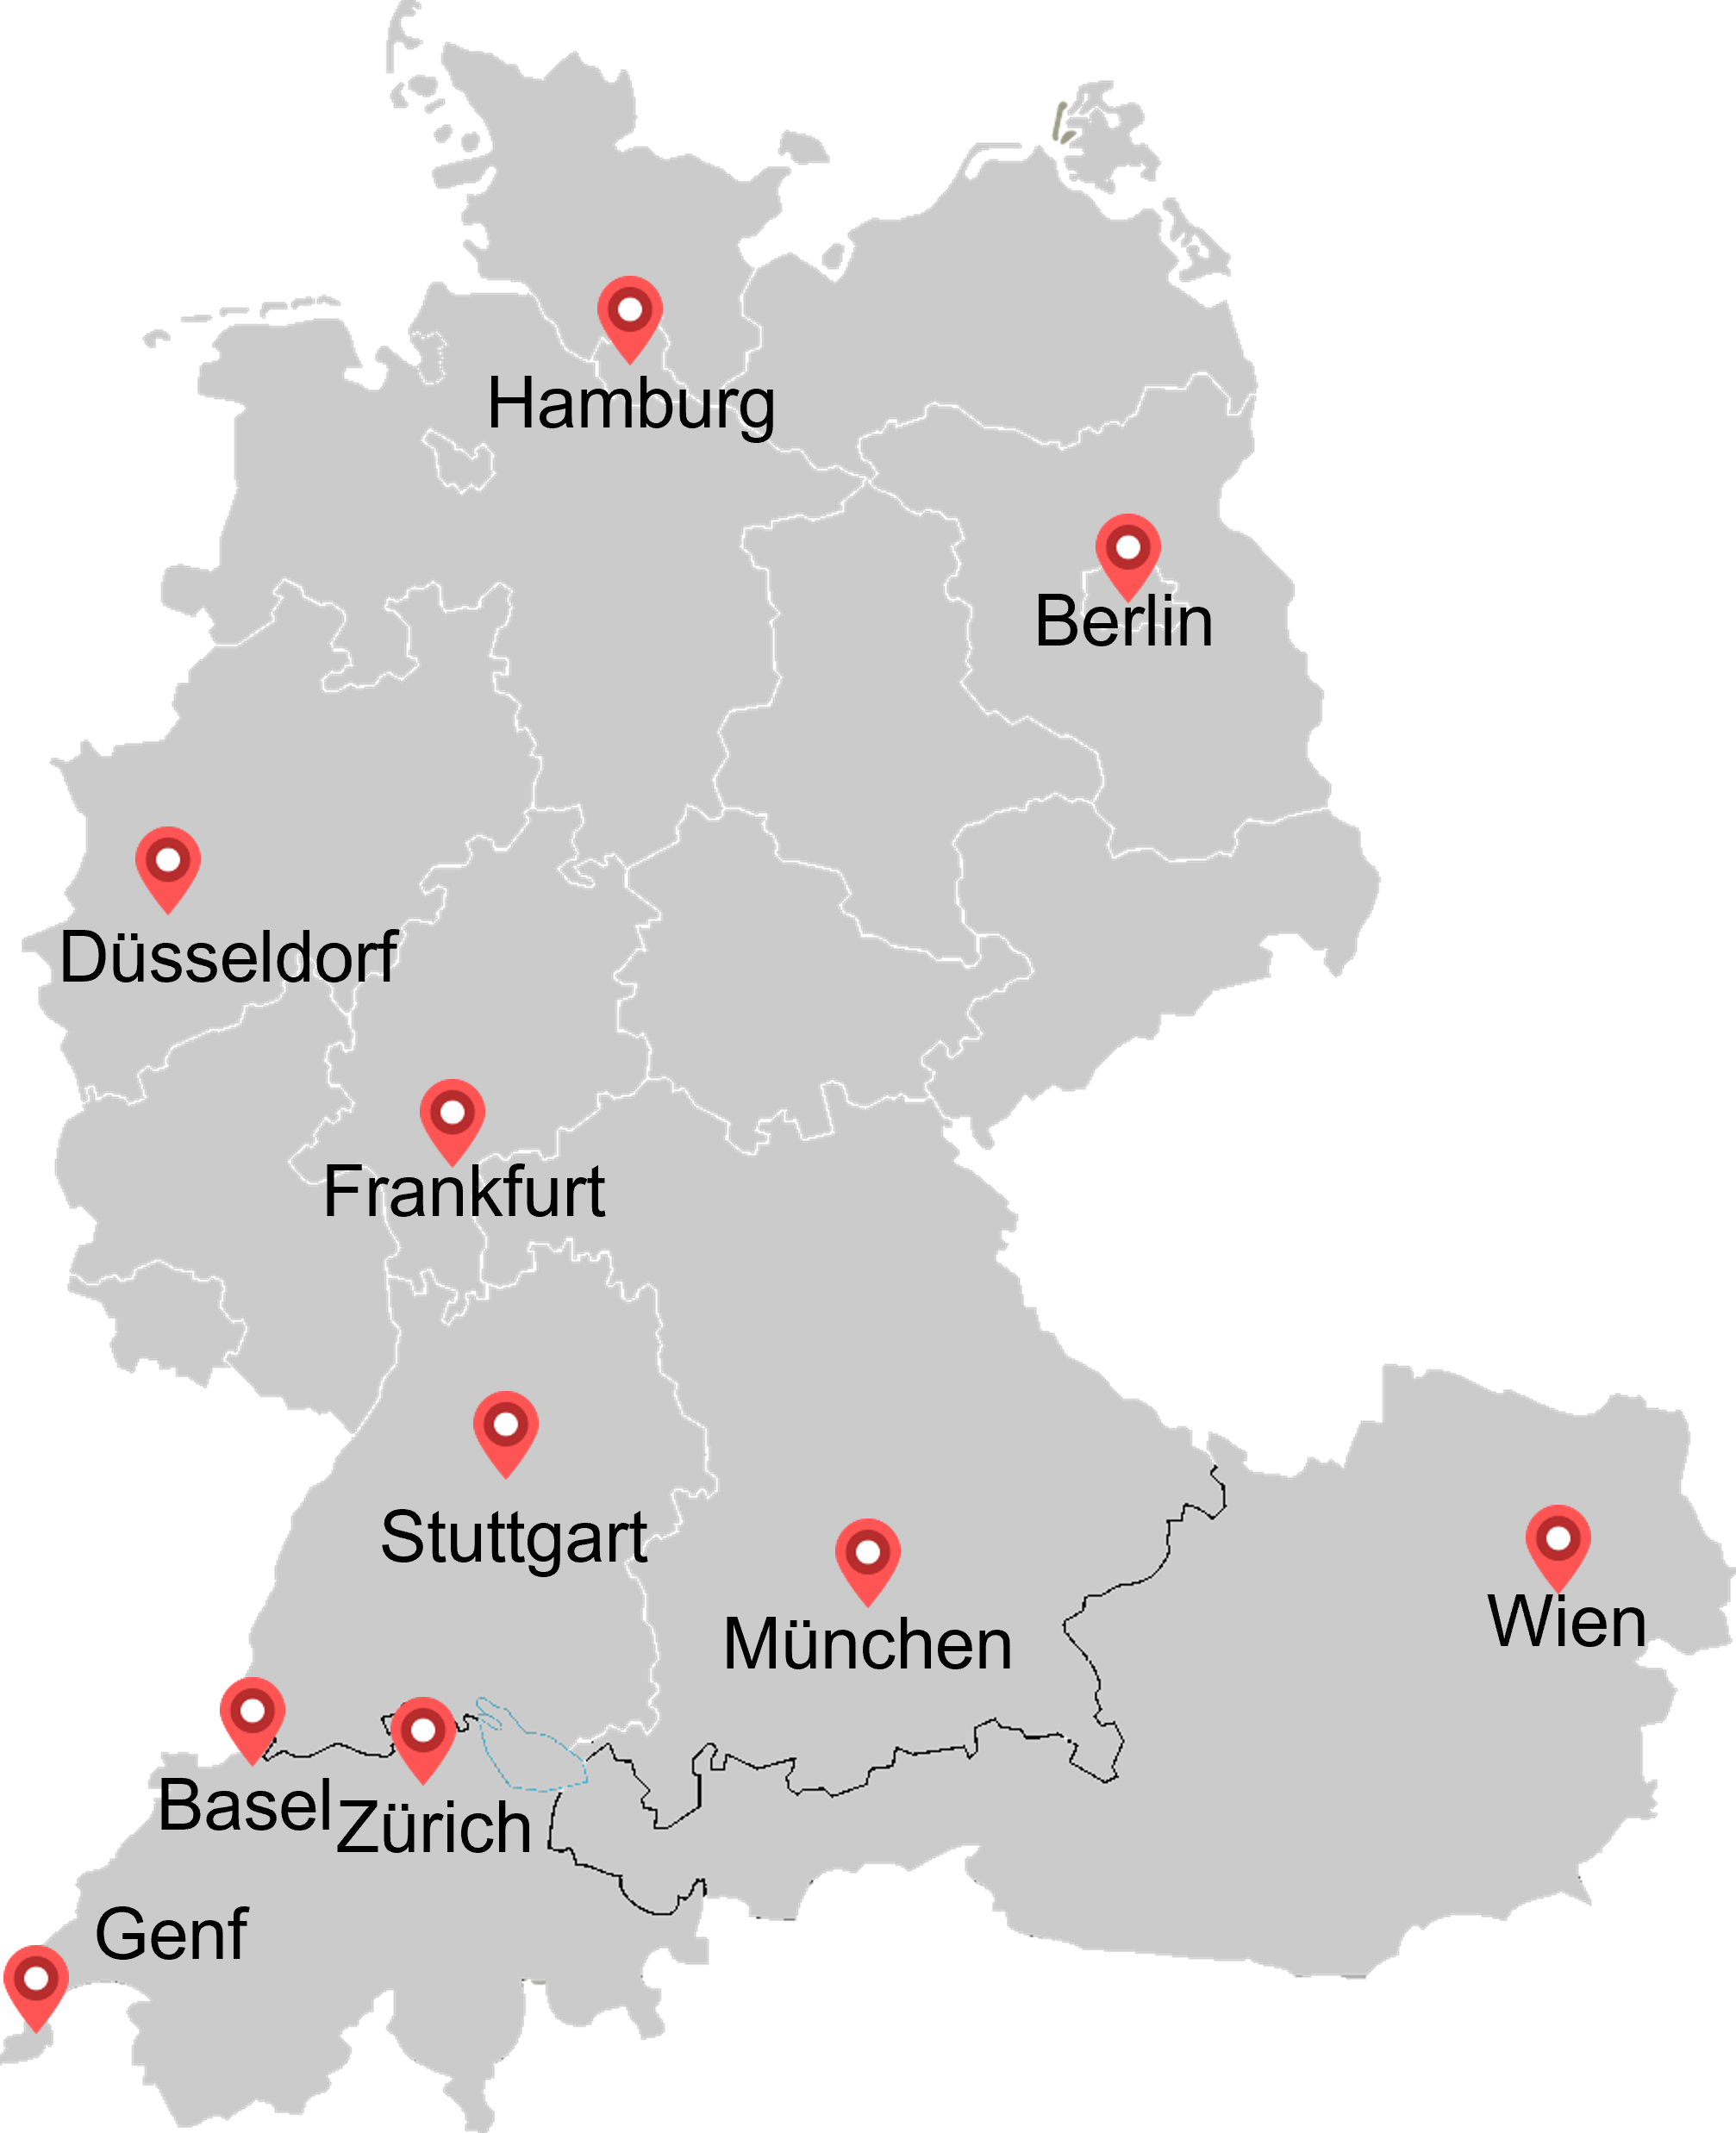 Map of EY-Parthenon locations